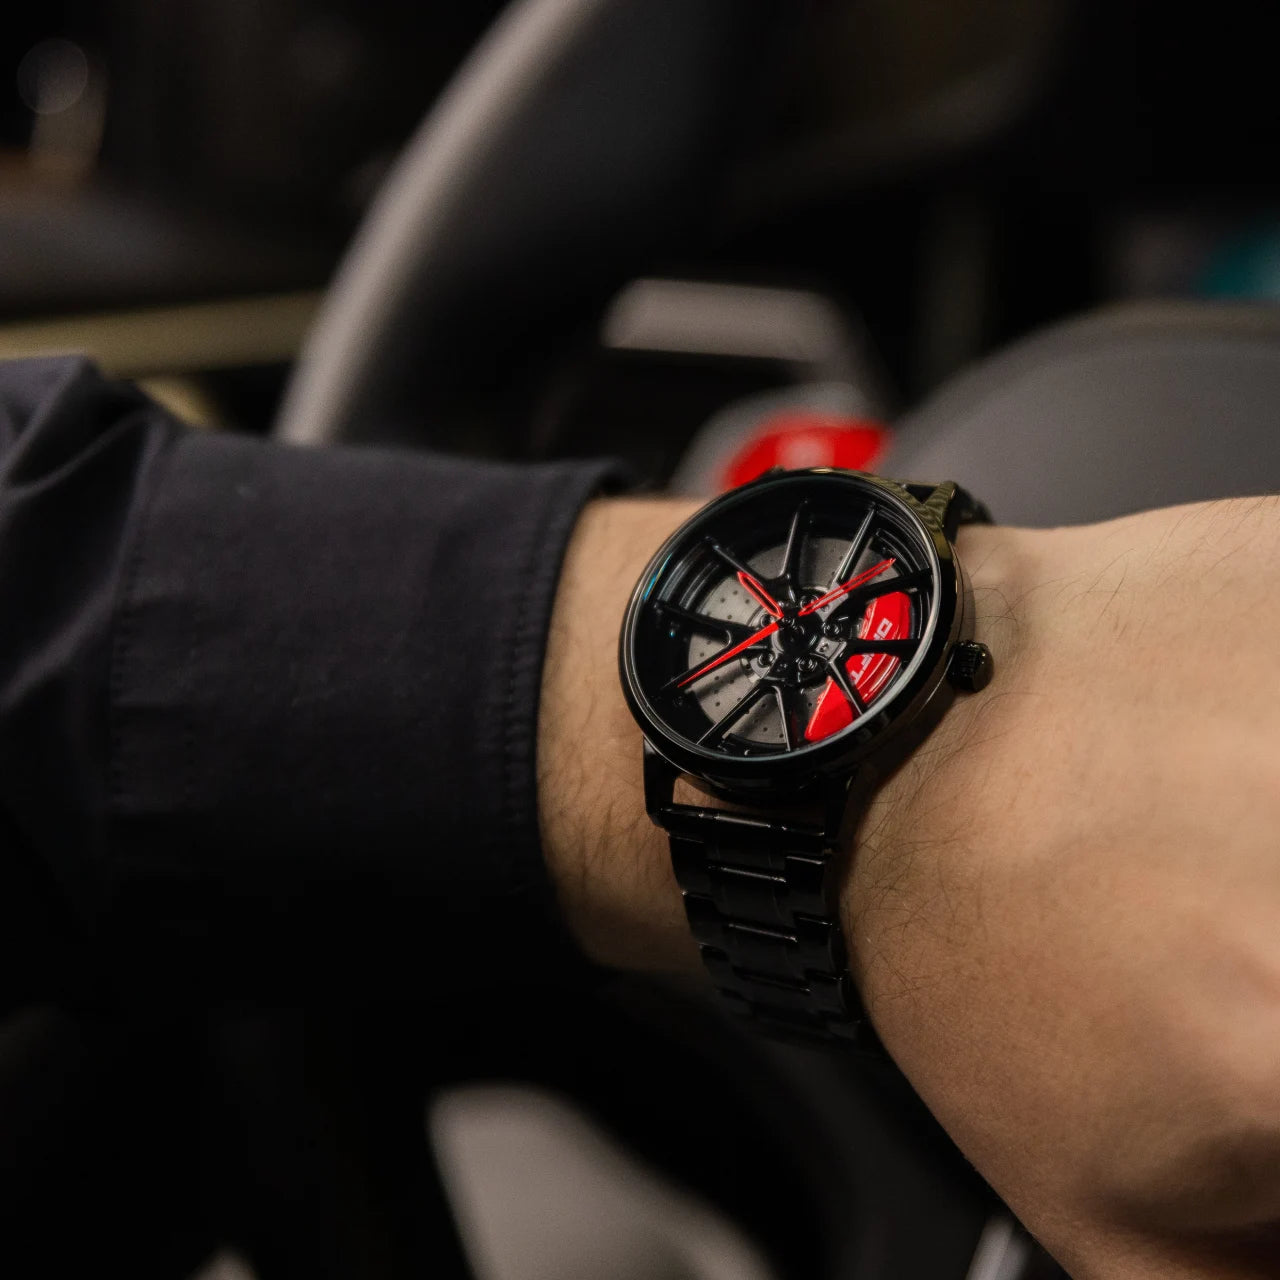 Elevate your fashion with our captivating red Nitro Rim Watch! Precision-engineered by a German startup, these watches are aimed at motorsport, tuning, and auto enthusiasts. Prepare to ignite your passion! #id_46744364253514